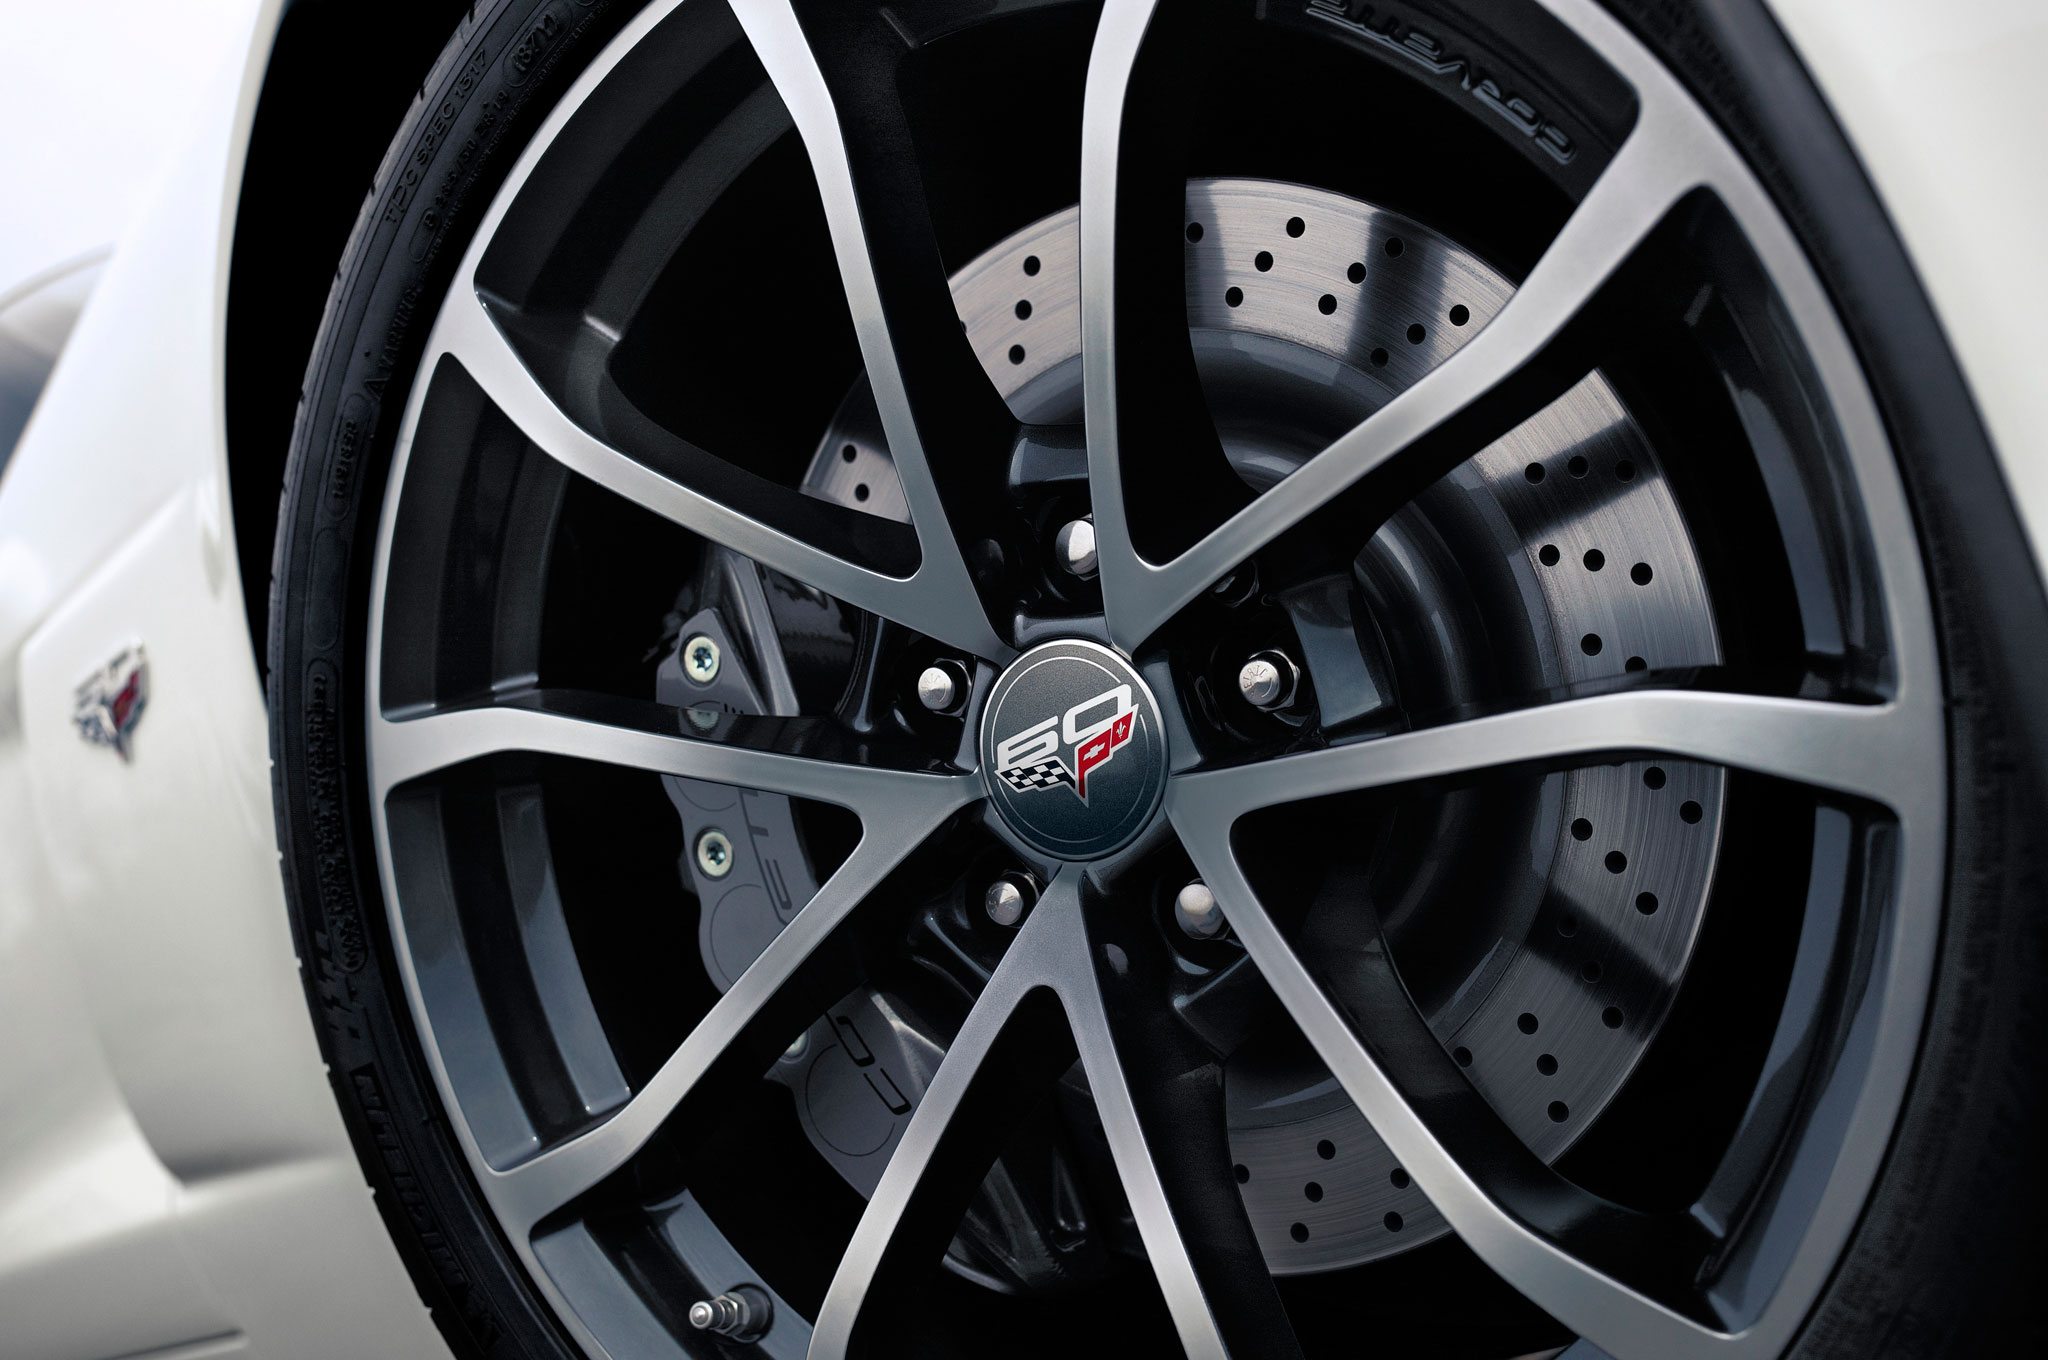 The 2013 427 Convertible Collectors Edition wheels featured a unique 10-spoke pattern and special "60" badging on the center caps.